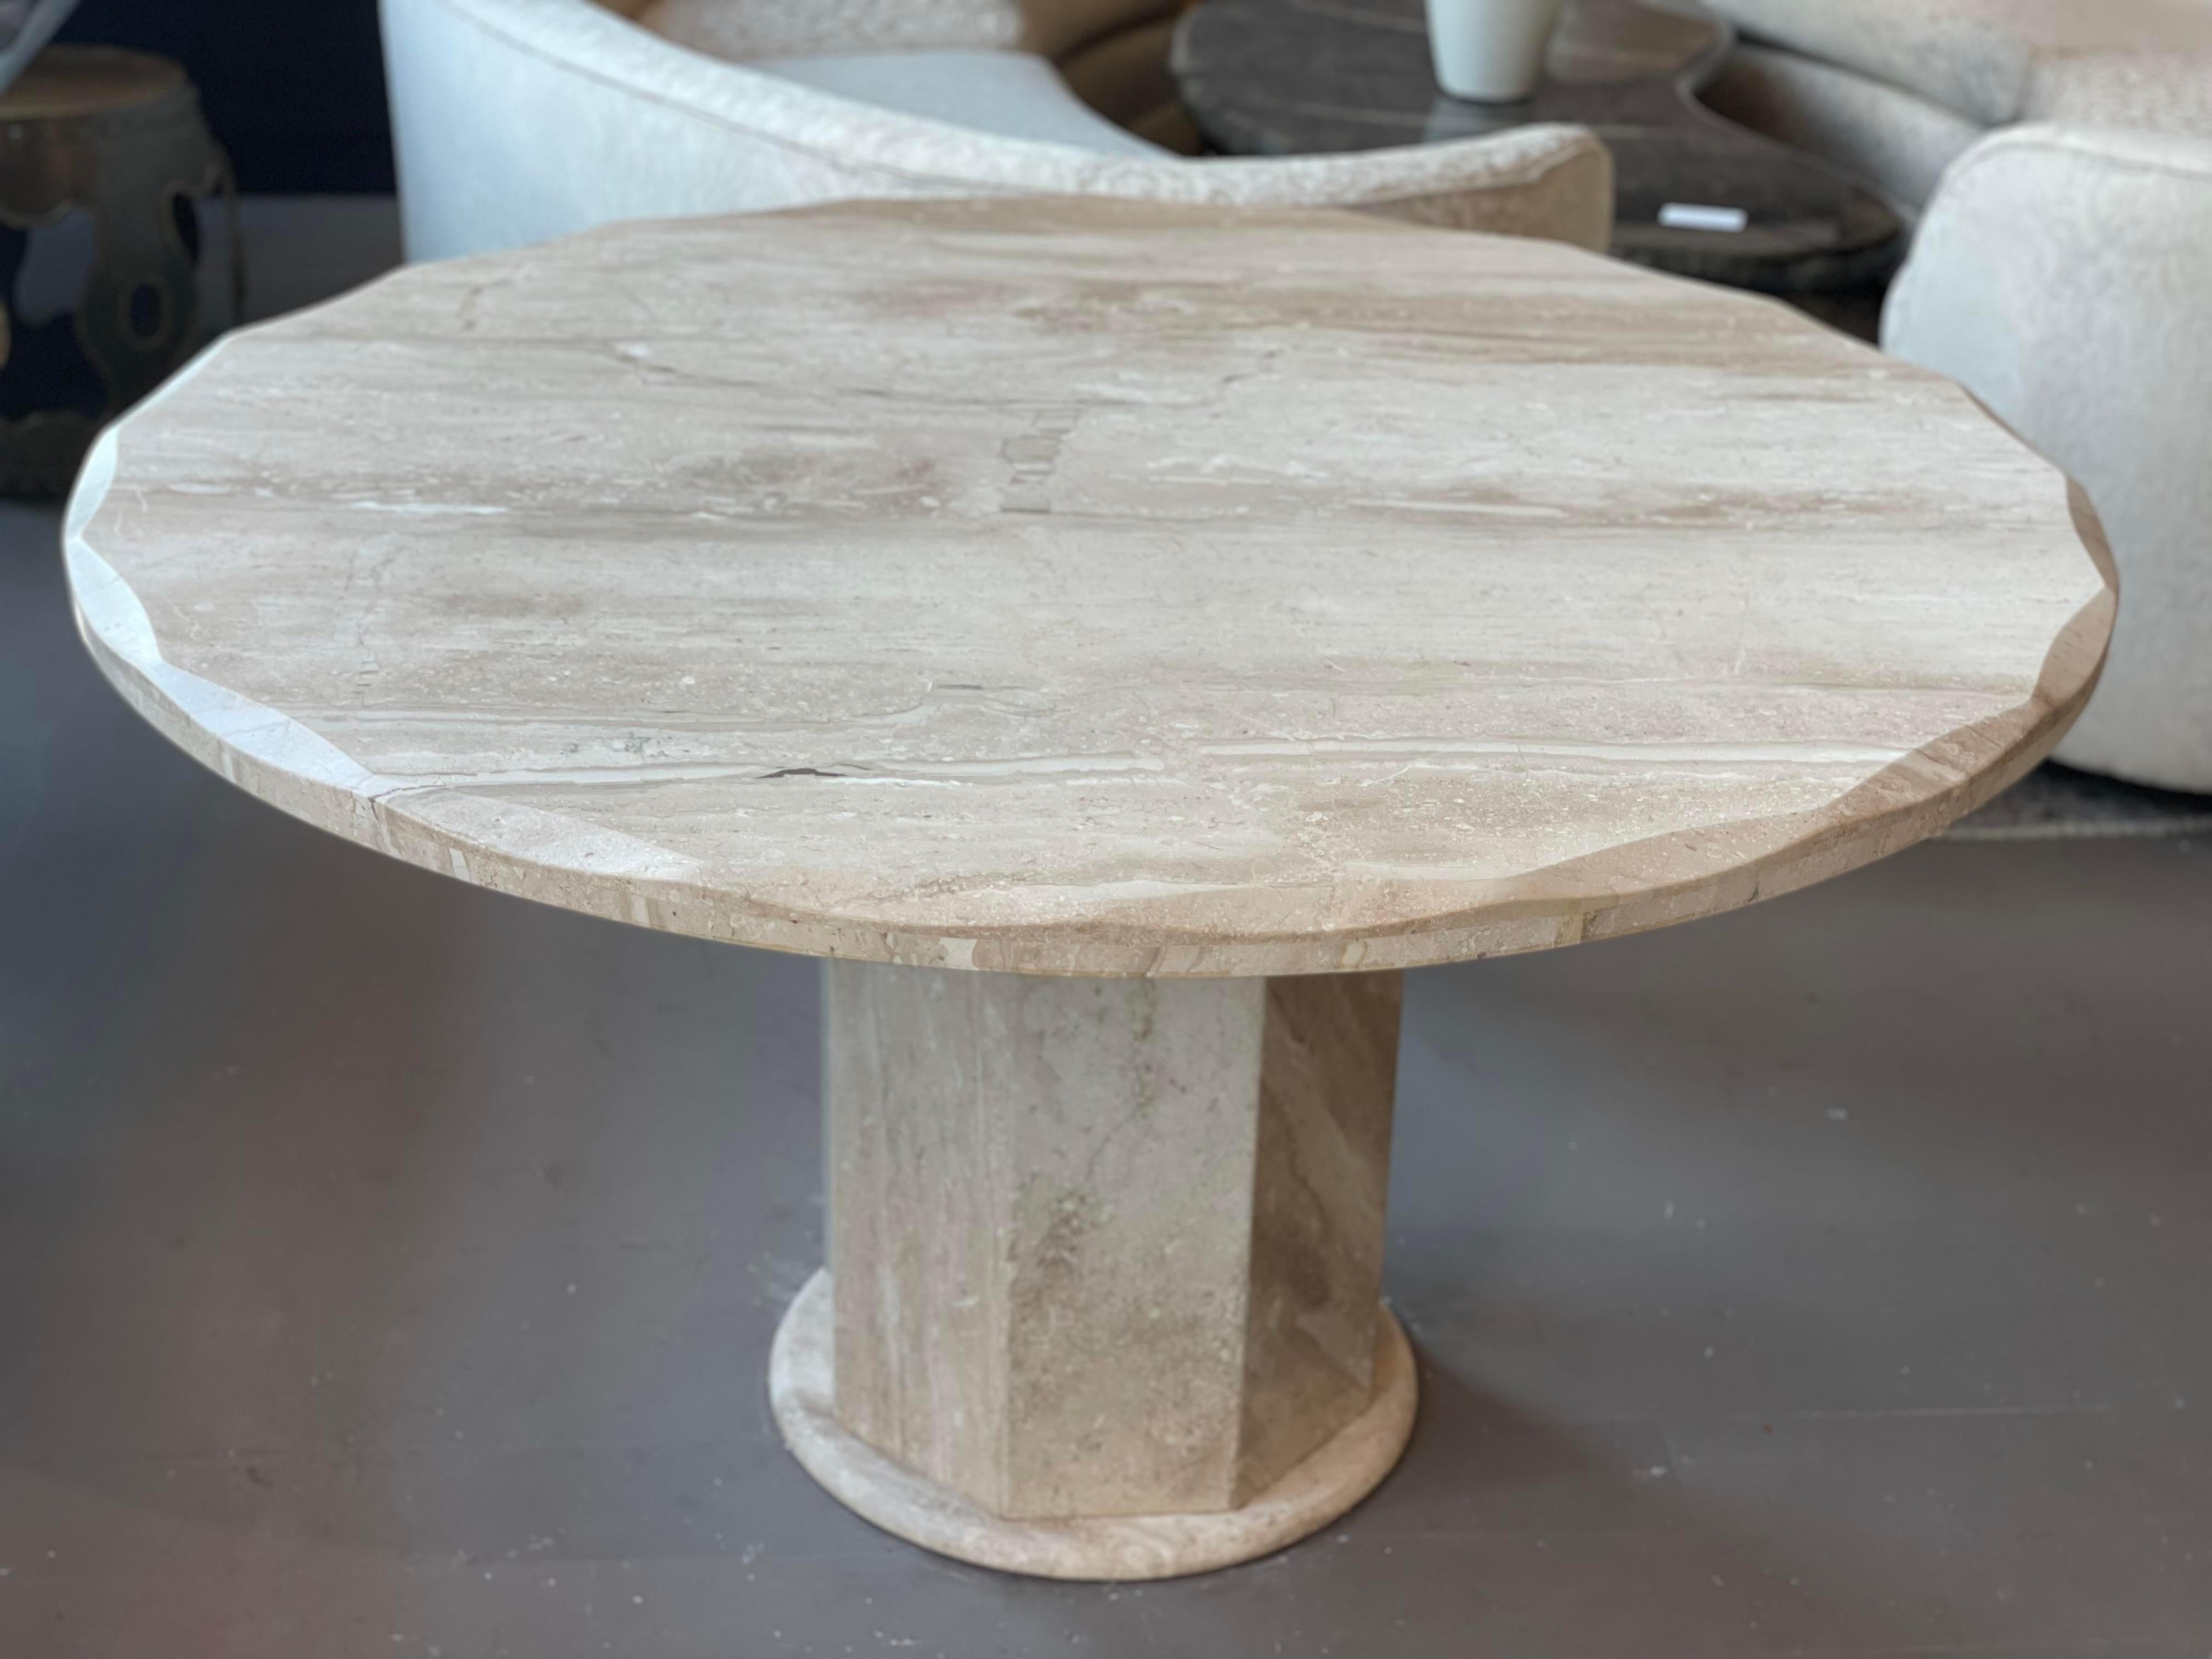 1980s Travertine Scalloped Edge Postmodern Dining Table For Sale 1